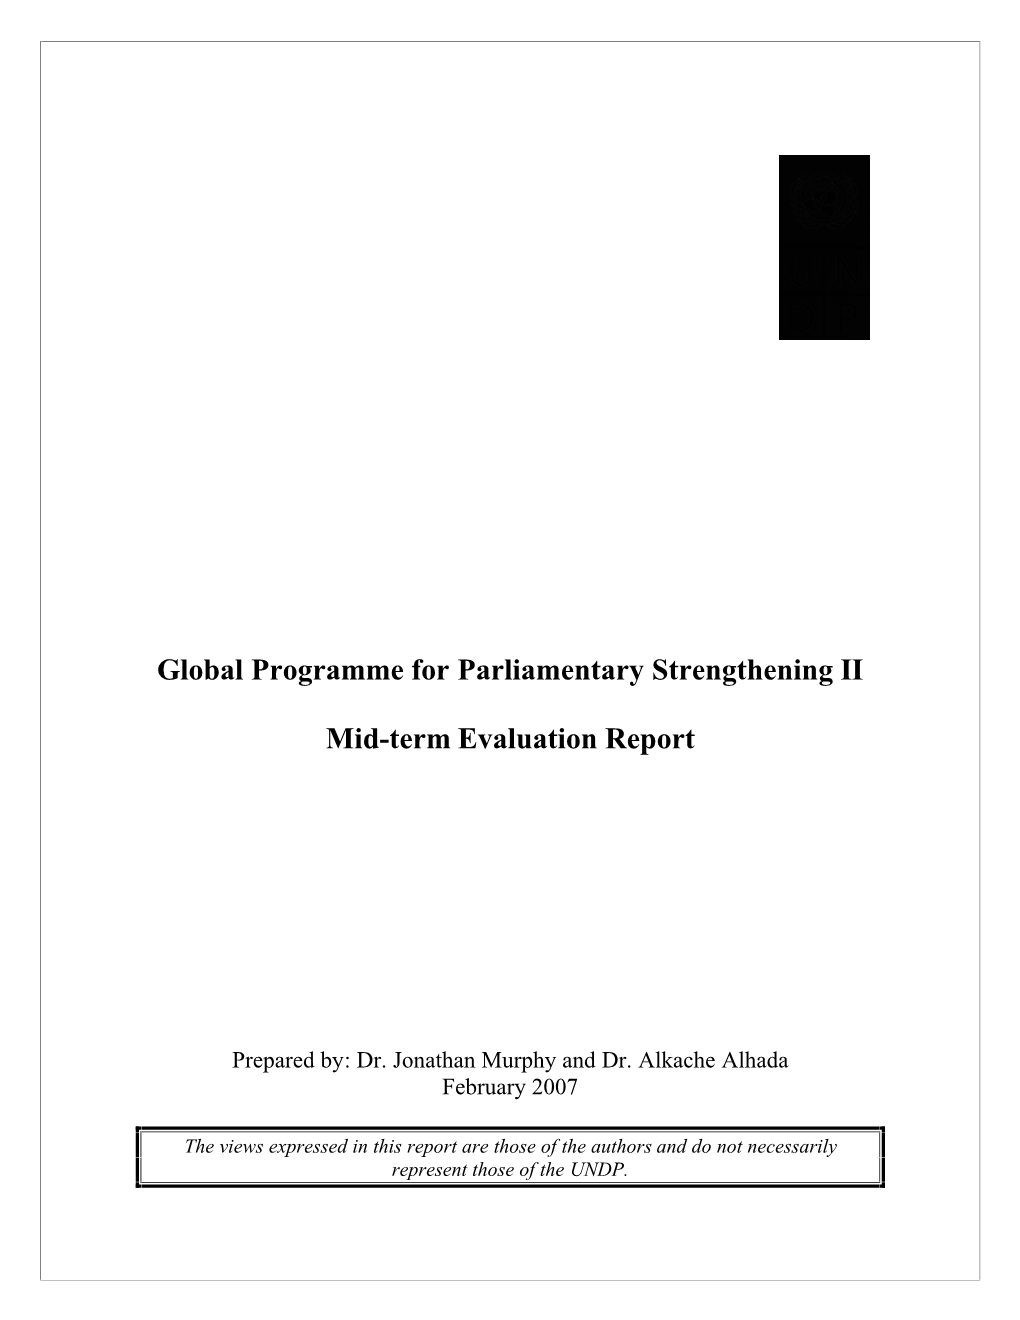 Global Programme for Parliamentary Strengthening II Mid-Term